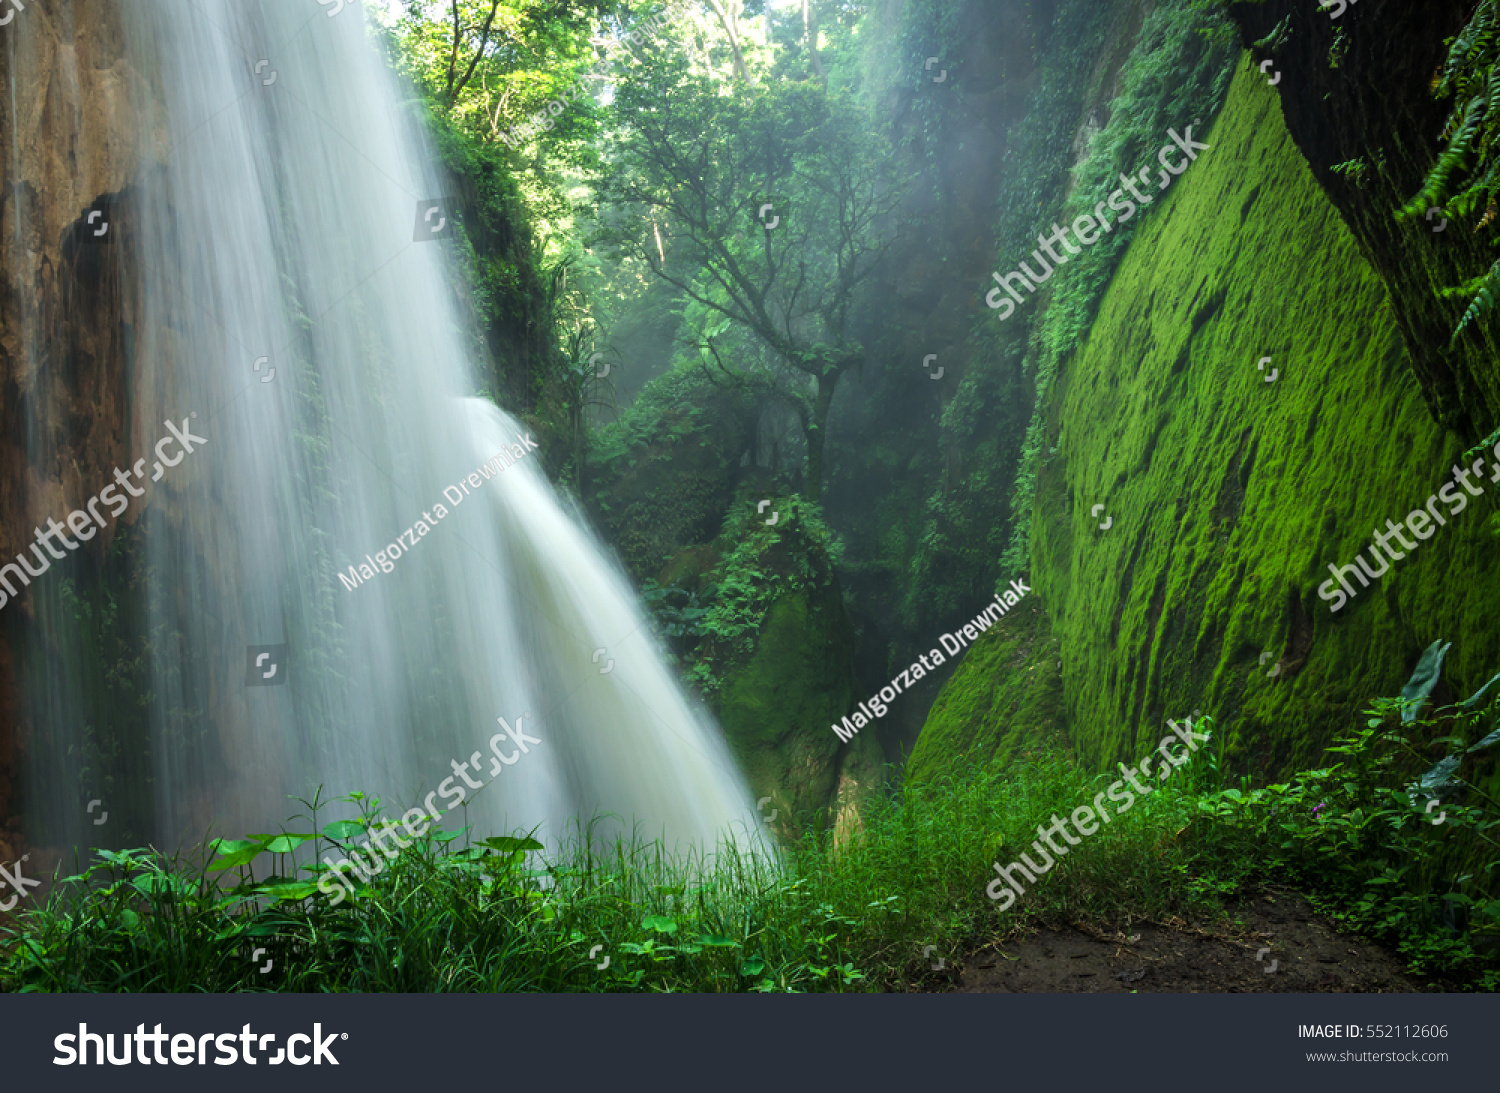 Small waterfall in the forest - Bali, Indonesia #552112606